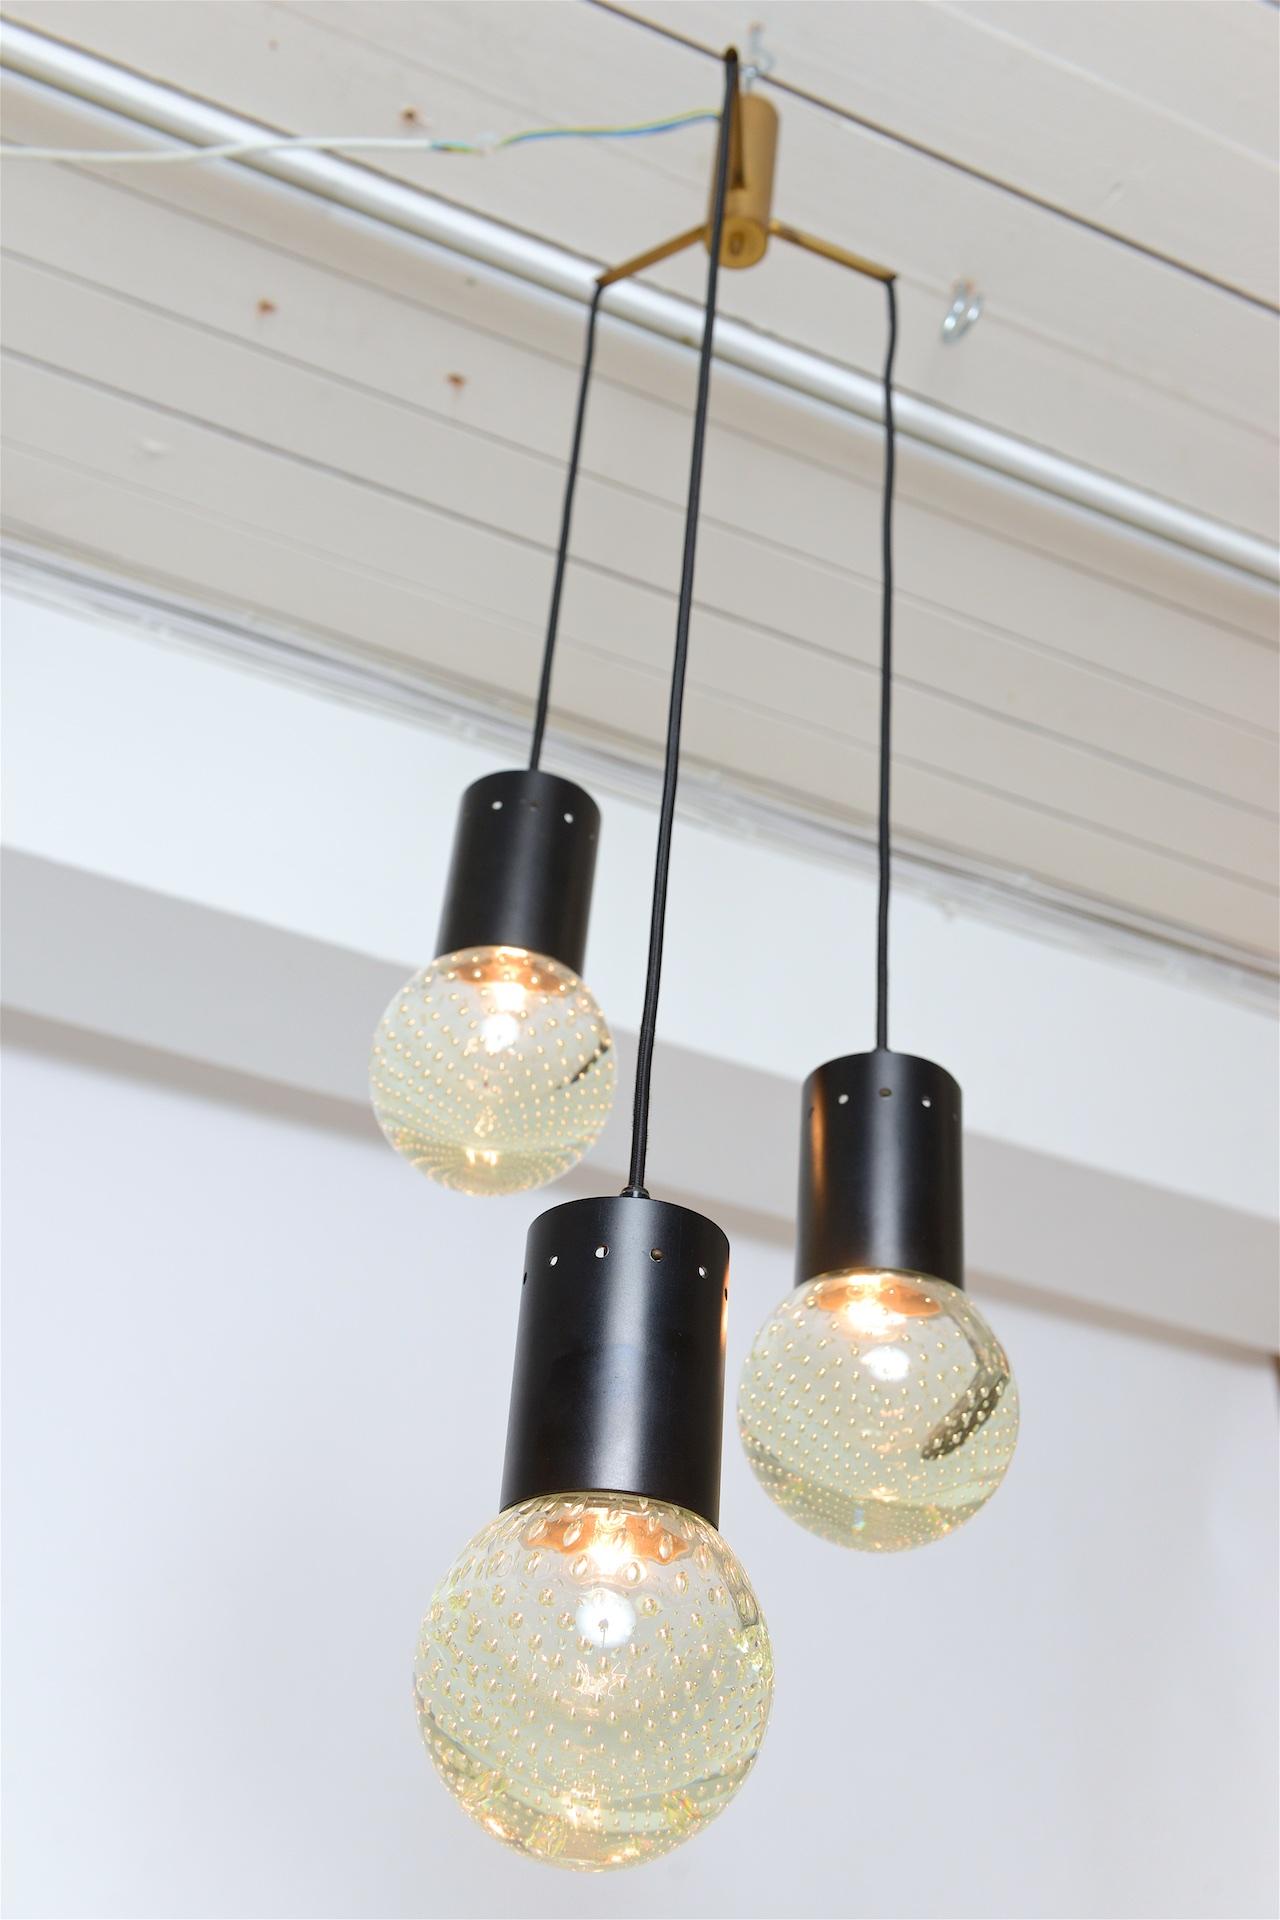 Chandelier with three glass globes. Lovely speckled light reflected through glass globes. 

Chandelier can be adjusted to any height.